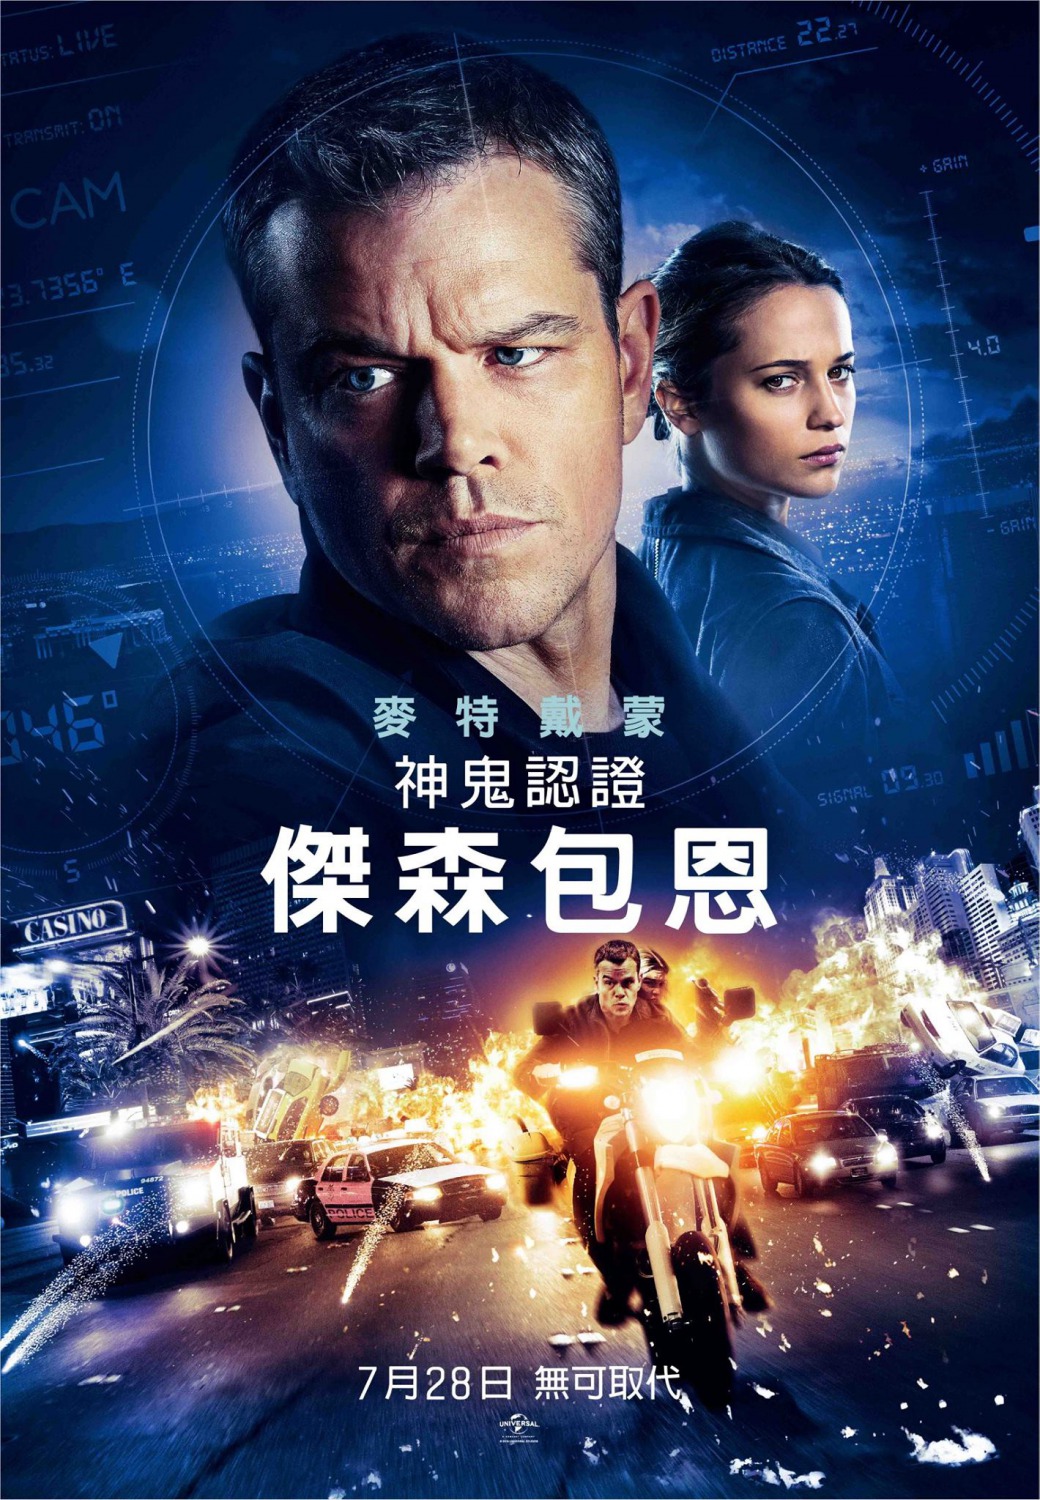 Extra Large Movie Poster Image for Jason Bourne (#4 of 6)